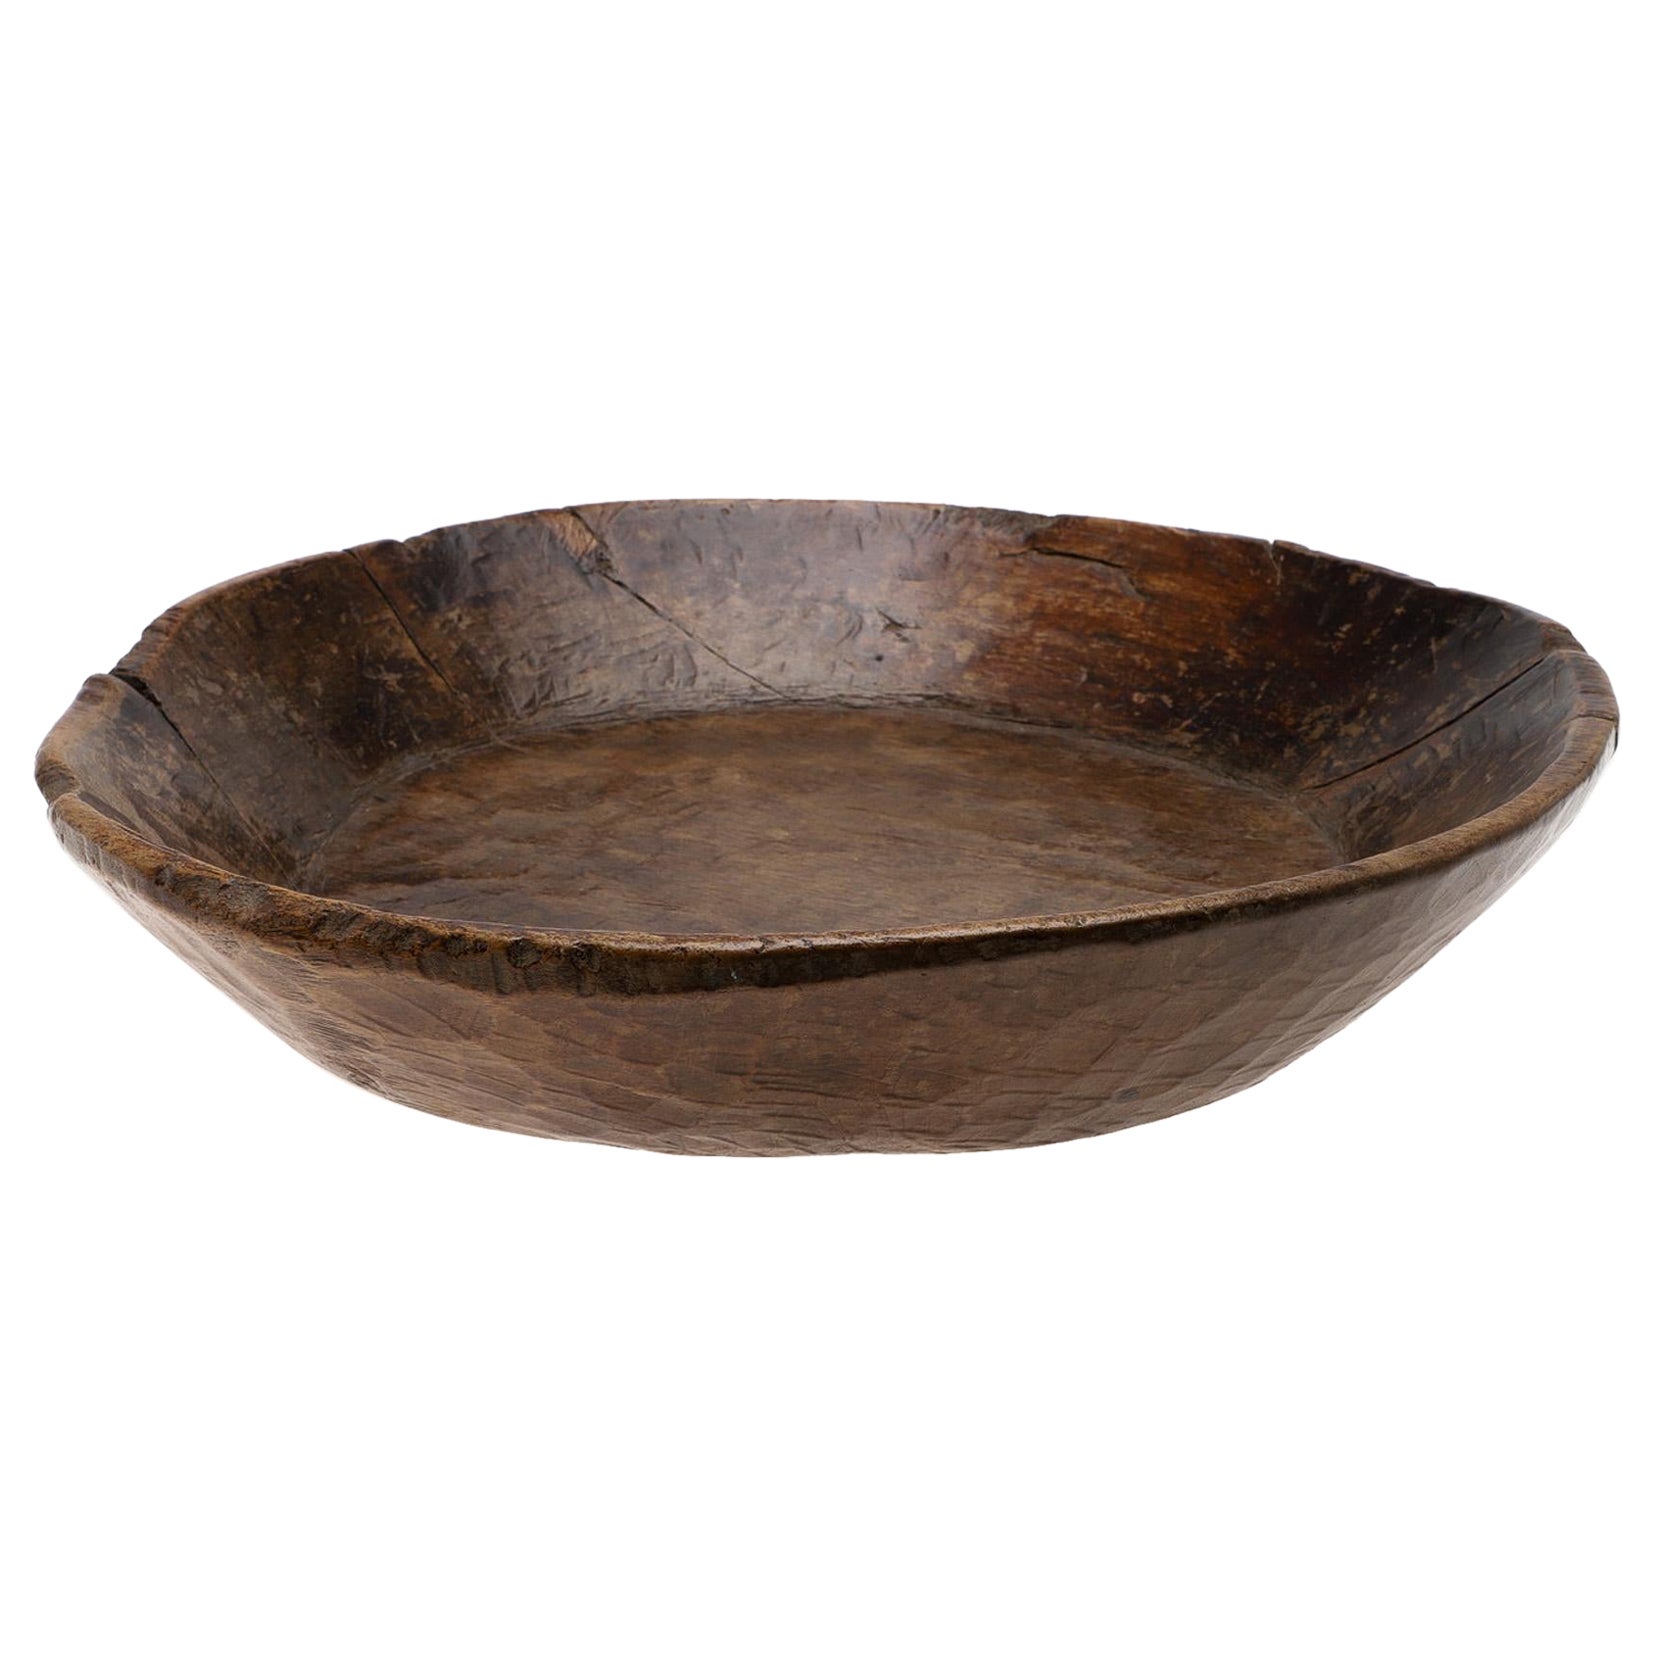 French Antique Dark Brown Wooden Bowl Tray in Oak Produced in France Early 1800s